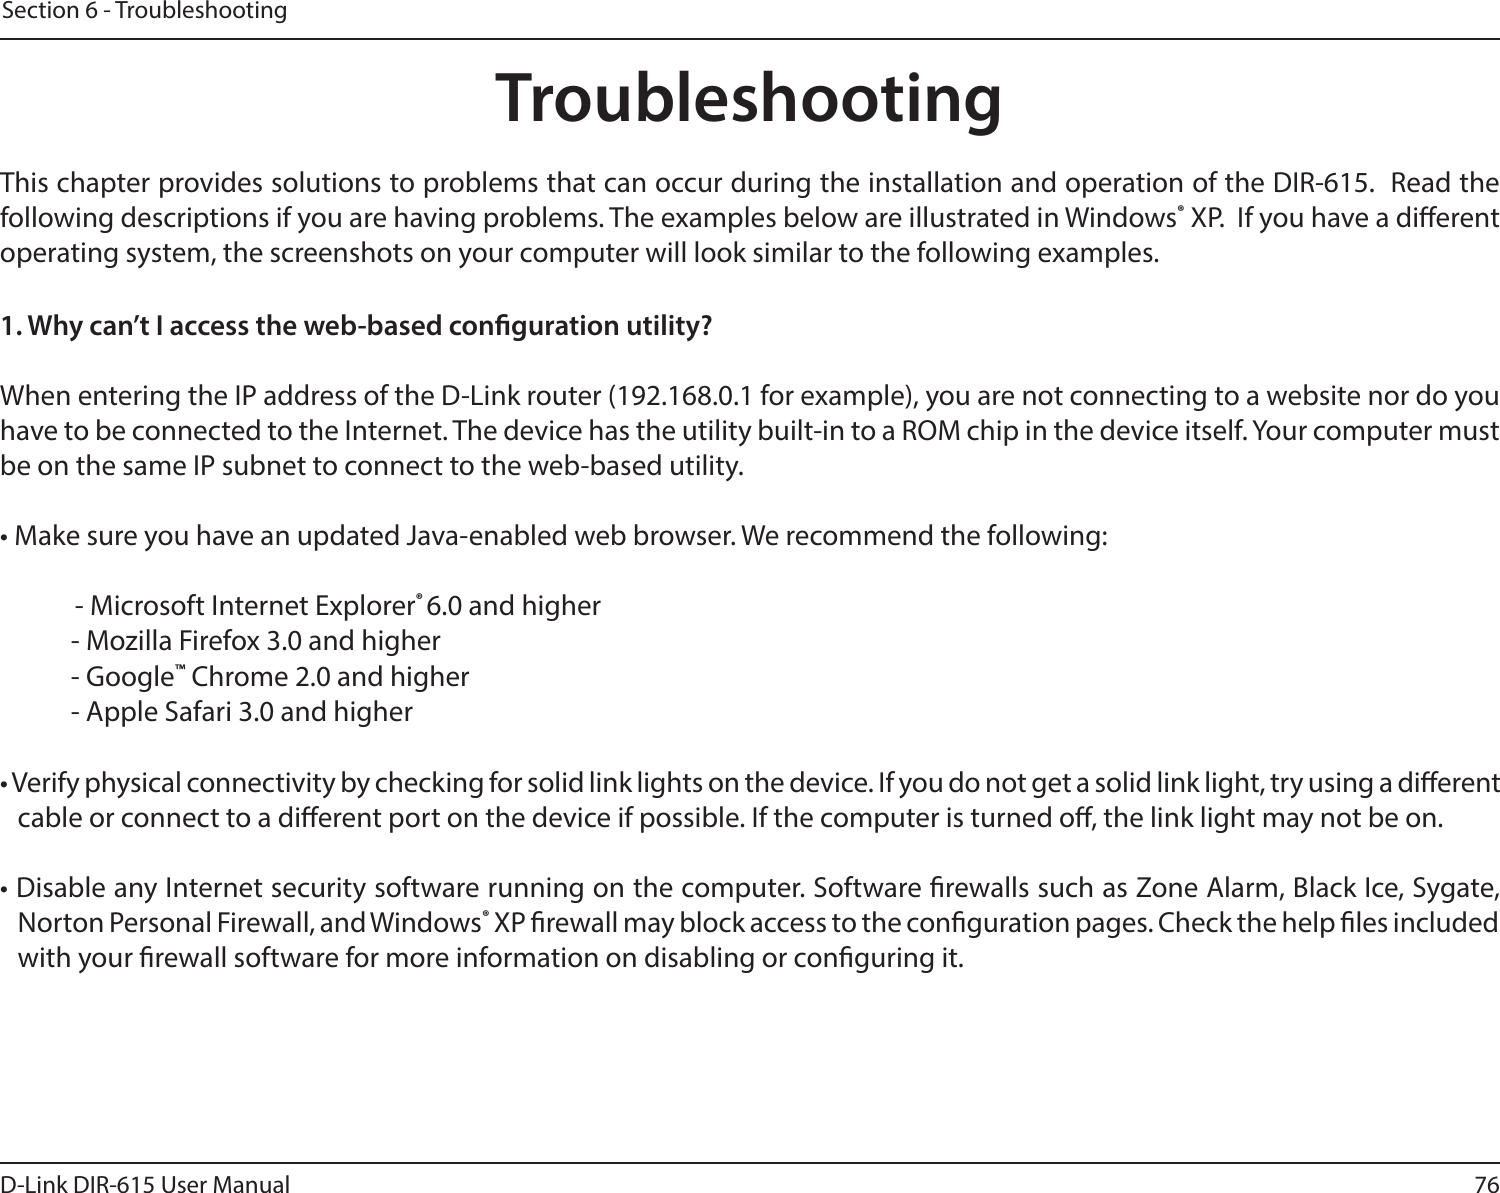 76D-Link DIR-615 User ManualSection 6 - TroubleshootingTroubleshootingThis chapter provides solutions to problems that can occur during the installation and operation of the DIR-615.  Read the following descriptions if you are having problems. The examples below are illustrated in Windows® XP.  If you have a dierent operating system, the screenshots on your computer will look similar to the following examples.1. Why can’t I access the web-based conguration utility?When entering the IP address of the D-Link router (192.168.0.1 for example), you are not connecting to a website nor do you have to be connected to the Internet. The device has the utility built-in to a ROM chip in the device itself. Your computer must be on the same IP subnet to connect to the web-based utility. • Make sure you have an updated Java-enabled web browser. We recommend the following:    - Microsoft Internet Explorer® 6.0 and higher- Mozilla Firefox 3.0 and higher- Google™ Chrome 2.0 and higher- Apple Safari 3.0 and higher• Verify physical connectivity by checking for solid link lights on the device. If you do not get a solid link light, try using a dierent cable or connect to a dierent port on the device if possible. If the computer is turned o, the link light may not be on.• Disable any Internet security software running on the computer. Software rewalls such as Zone Alarm, Black Ice, Sygate, Norton Personal Firewall, and Windows® XP rewall may block access to the conguration pages. Check the help les included with your rewall software for more information on disabling or conguring it.